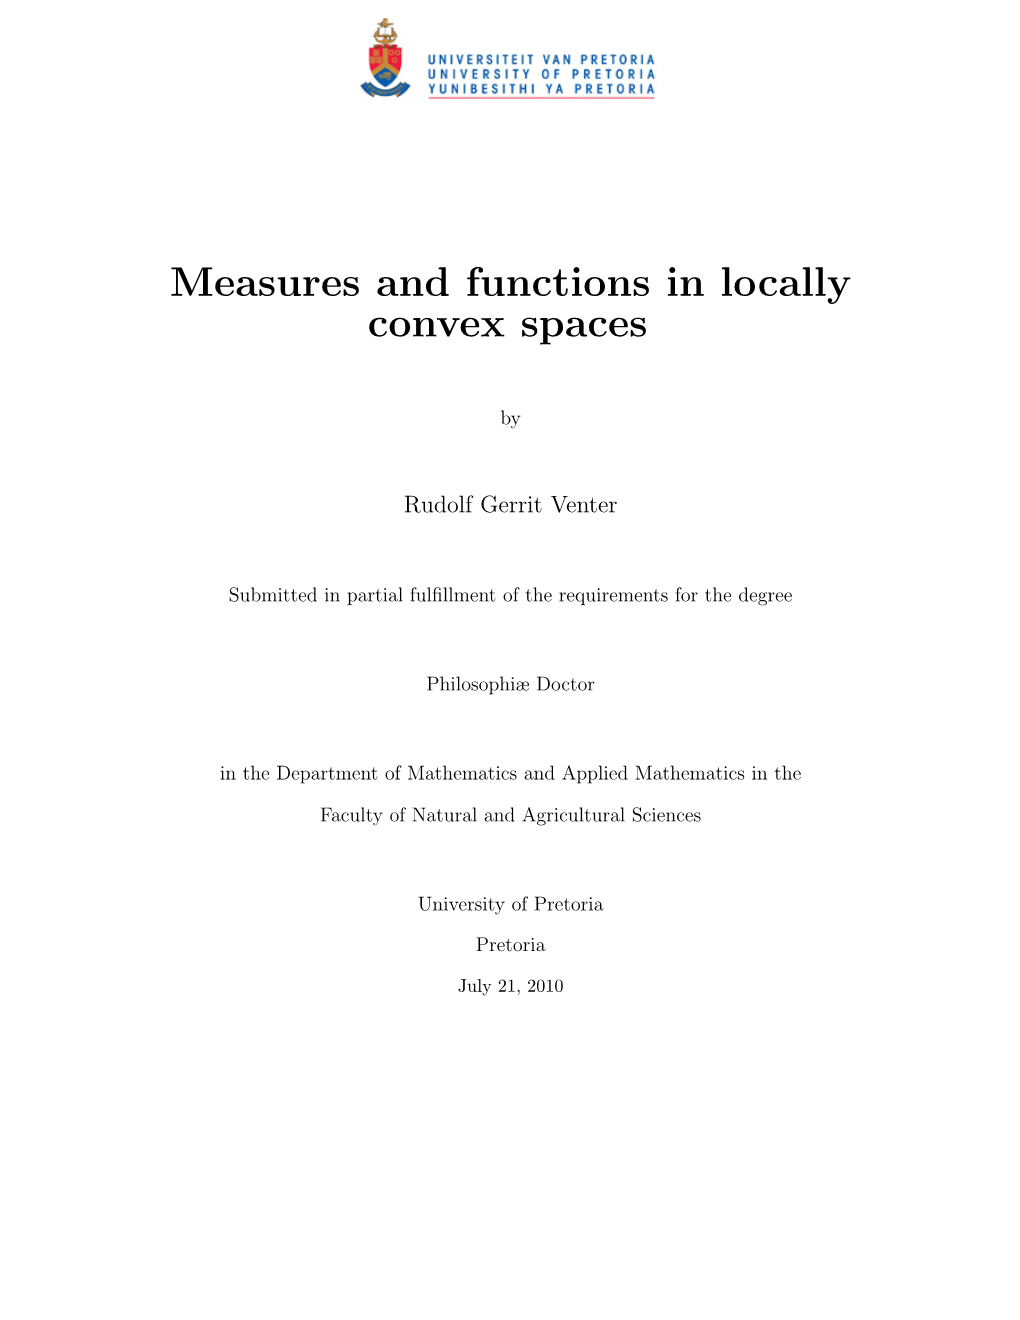 Measures and Functions in Locally Convex Spaces